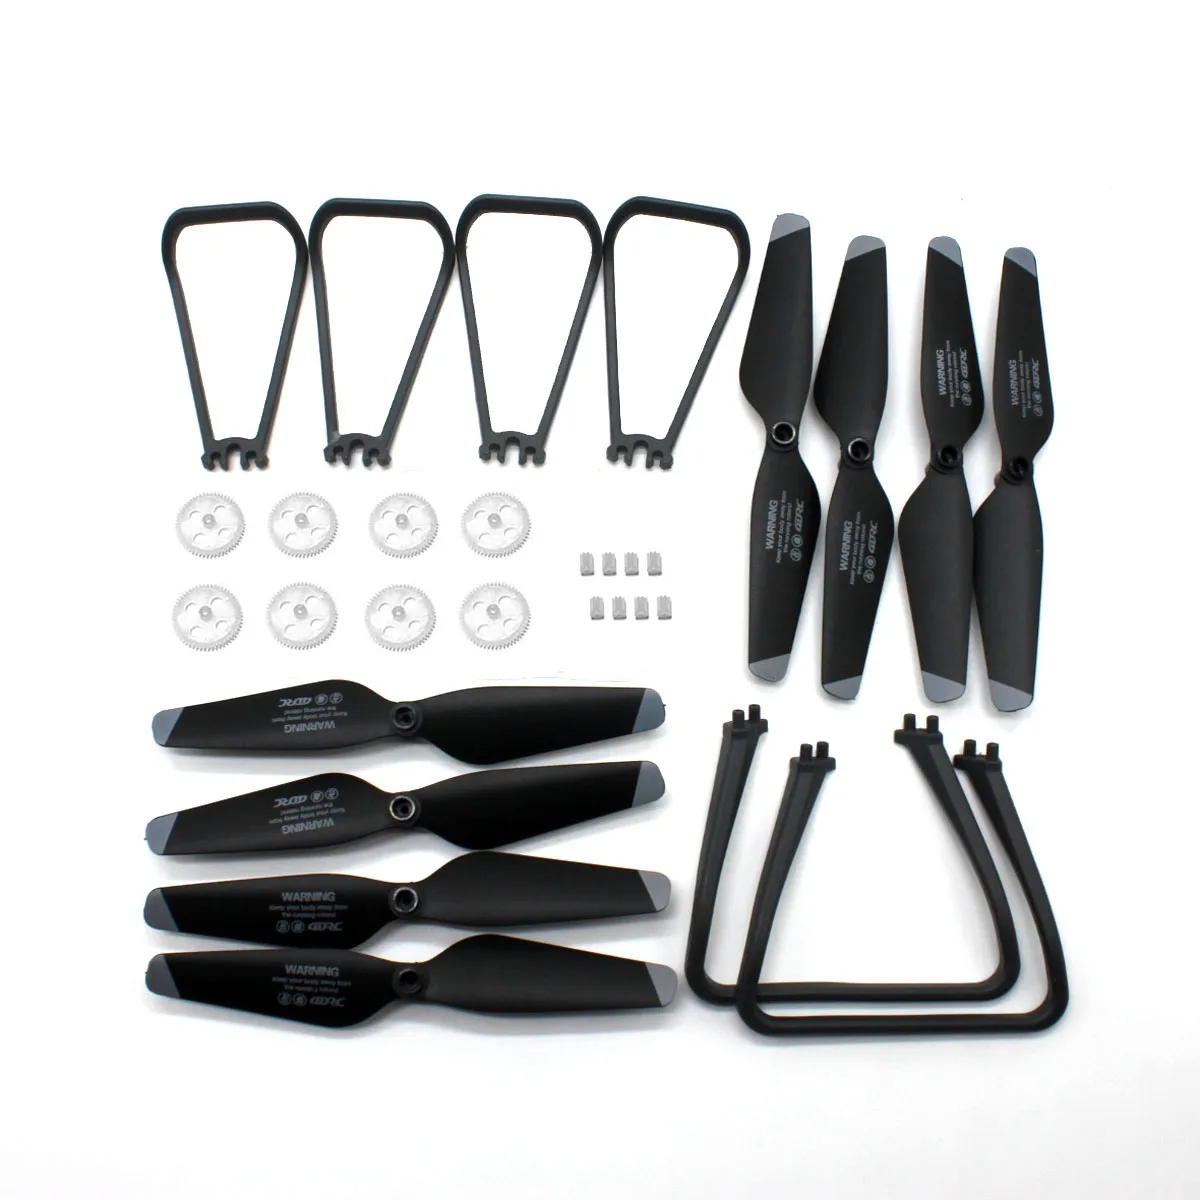 4DRC V14 RC Drone Quadcopter 4D-V14 Gears Propellers Blade Protection Guard Landing Skid Spare Parts